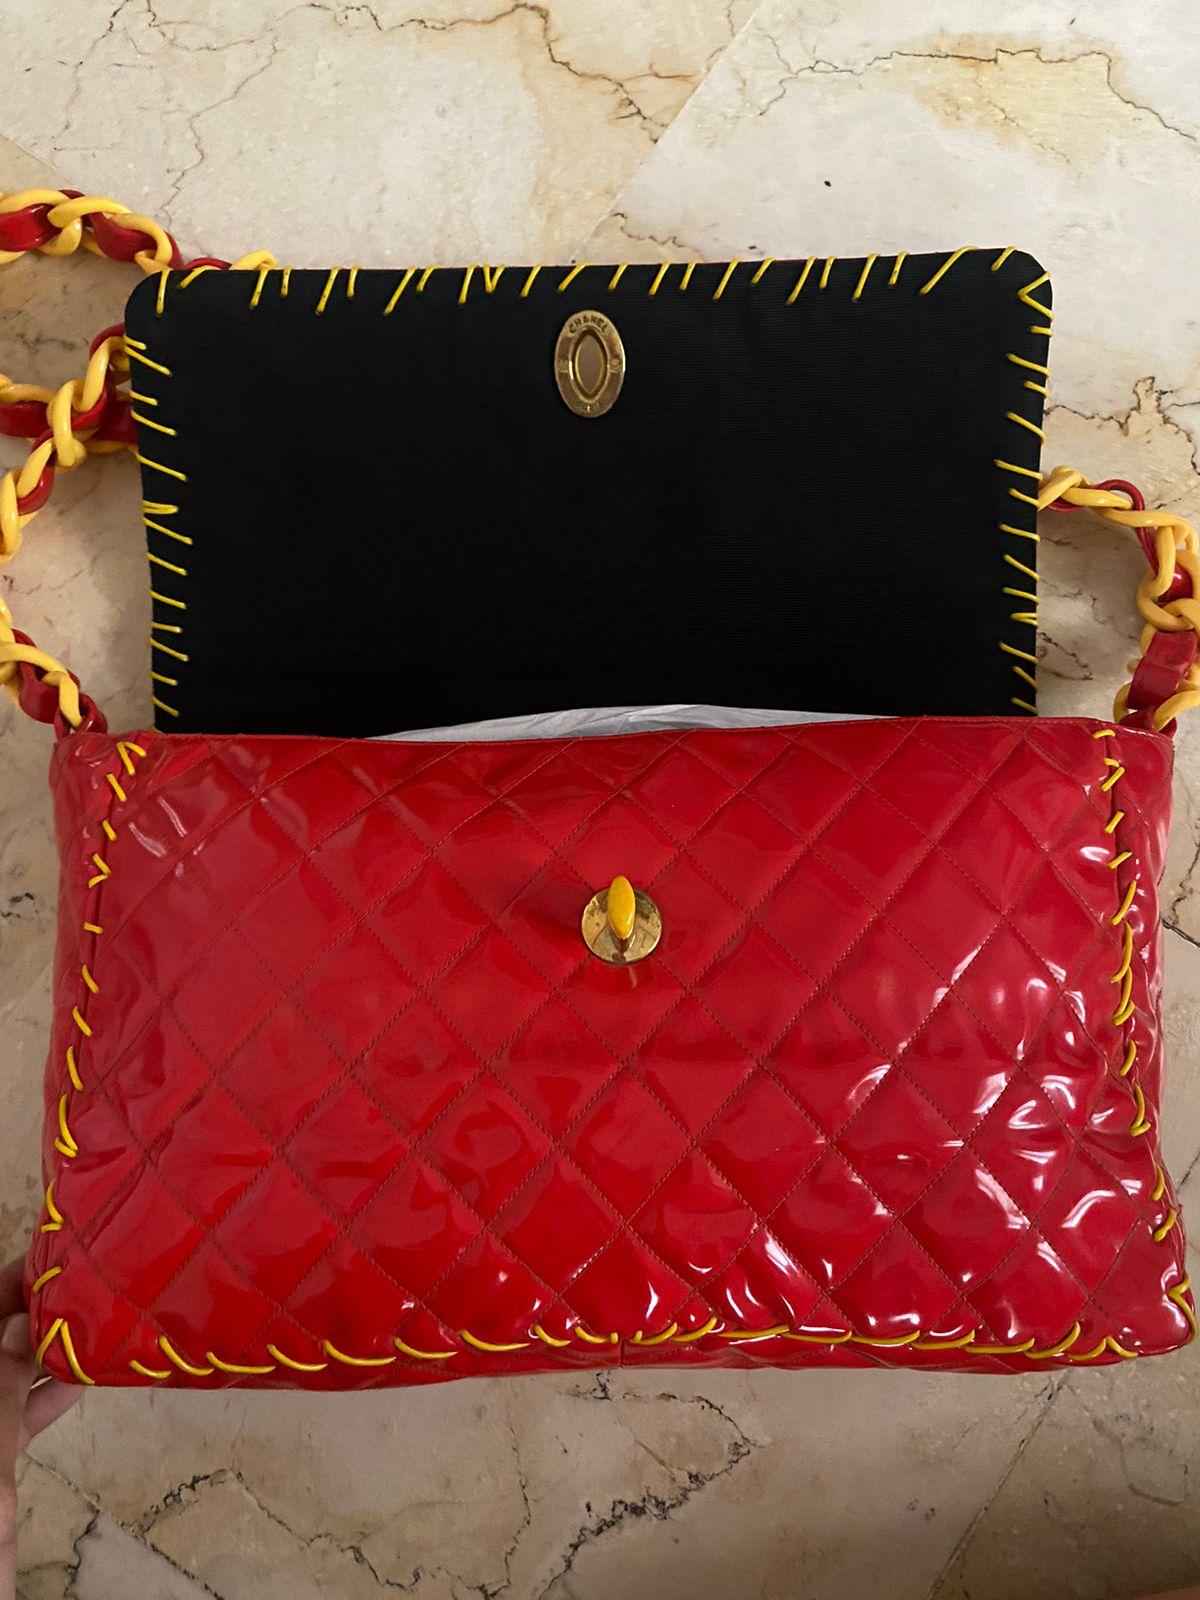 Rare 1990s Chanel Red Vinyl Maxi Whipstitch Flap Bag 5